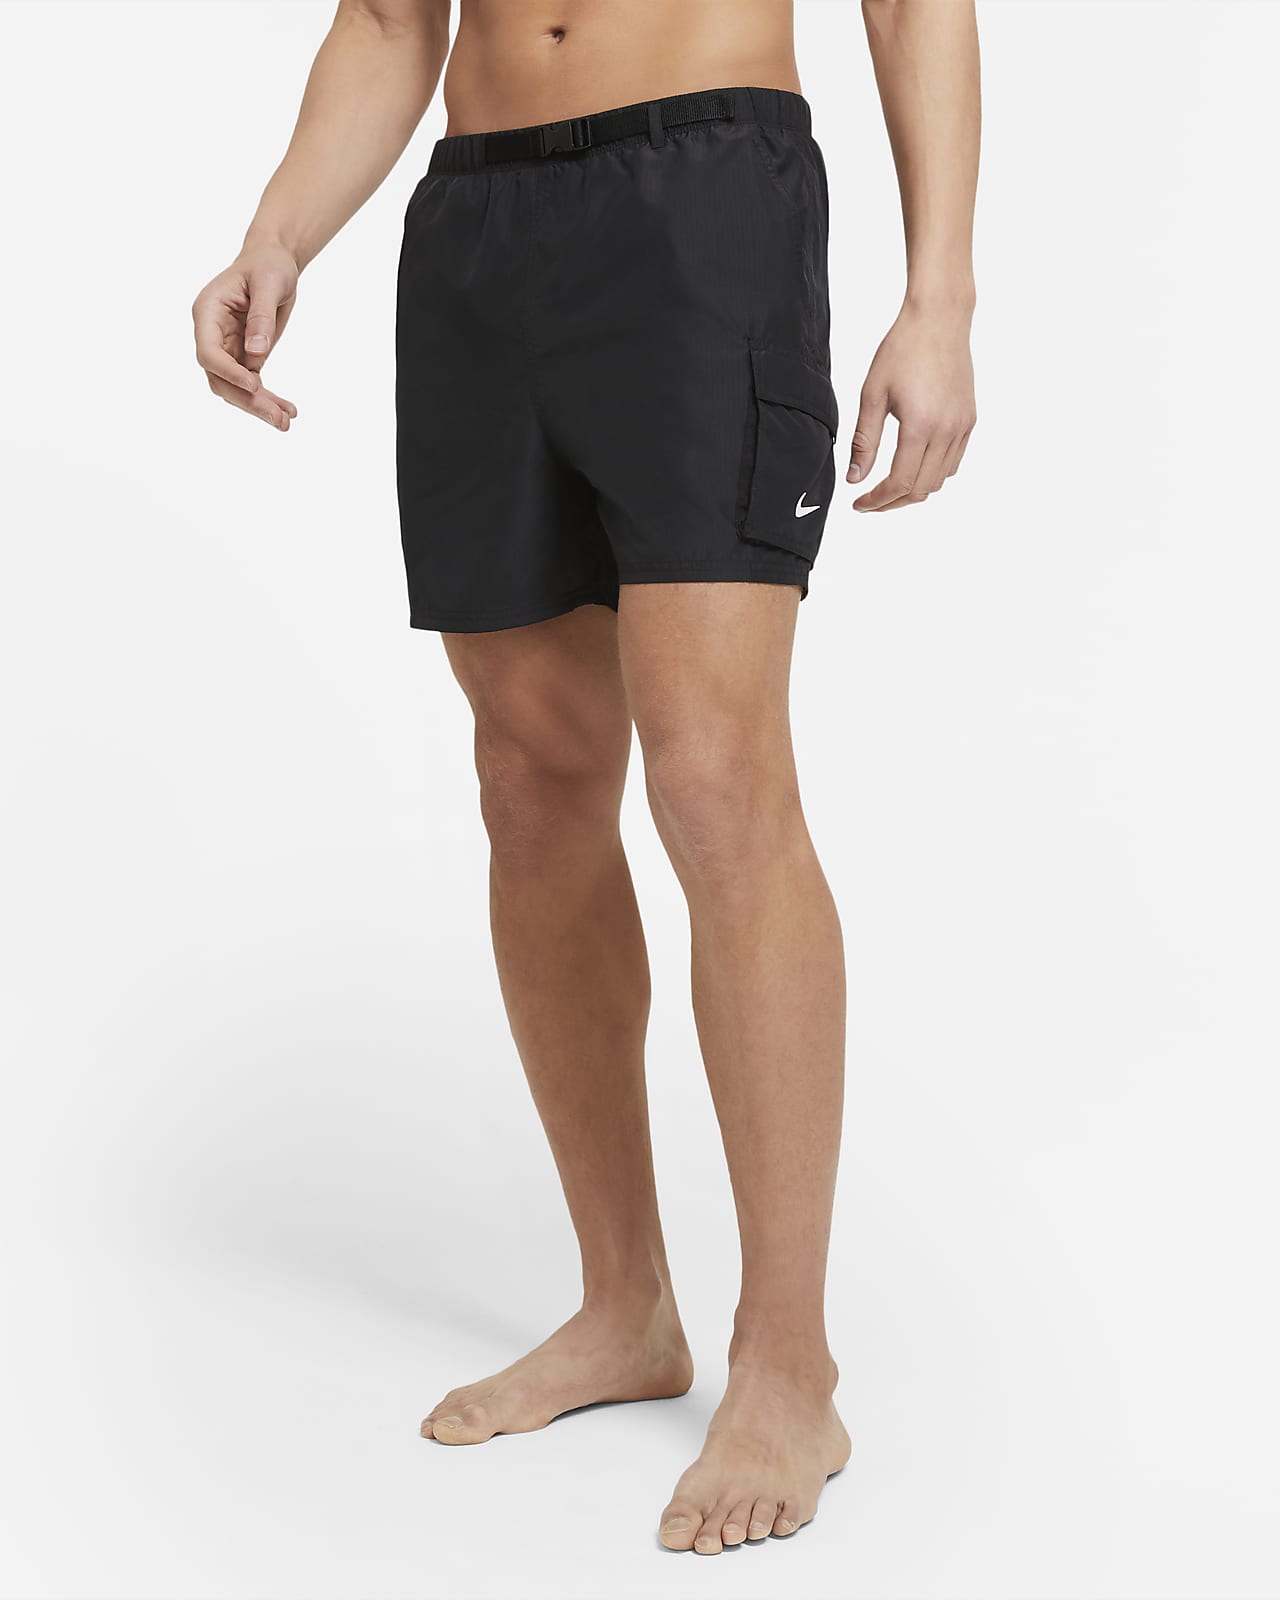 Nike Men's 13cm (approx.) Belted Packable Swimming Trunks. Nike LU